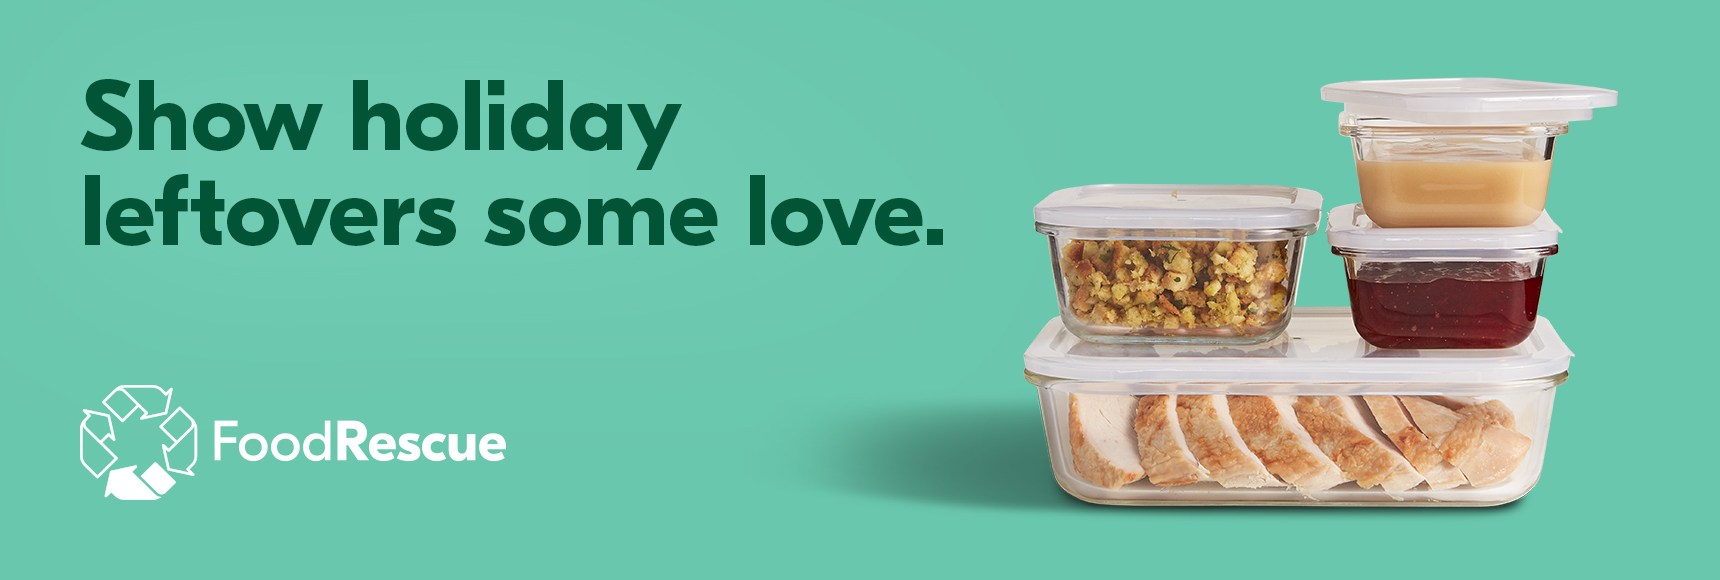 Show holiday leftovers some love.